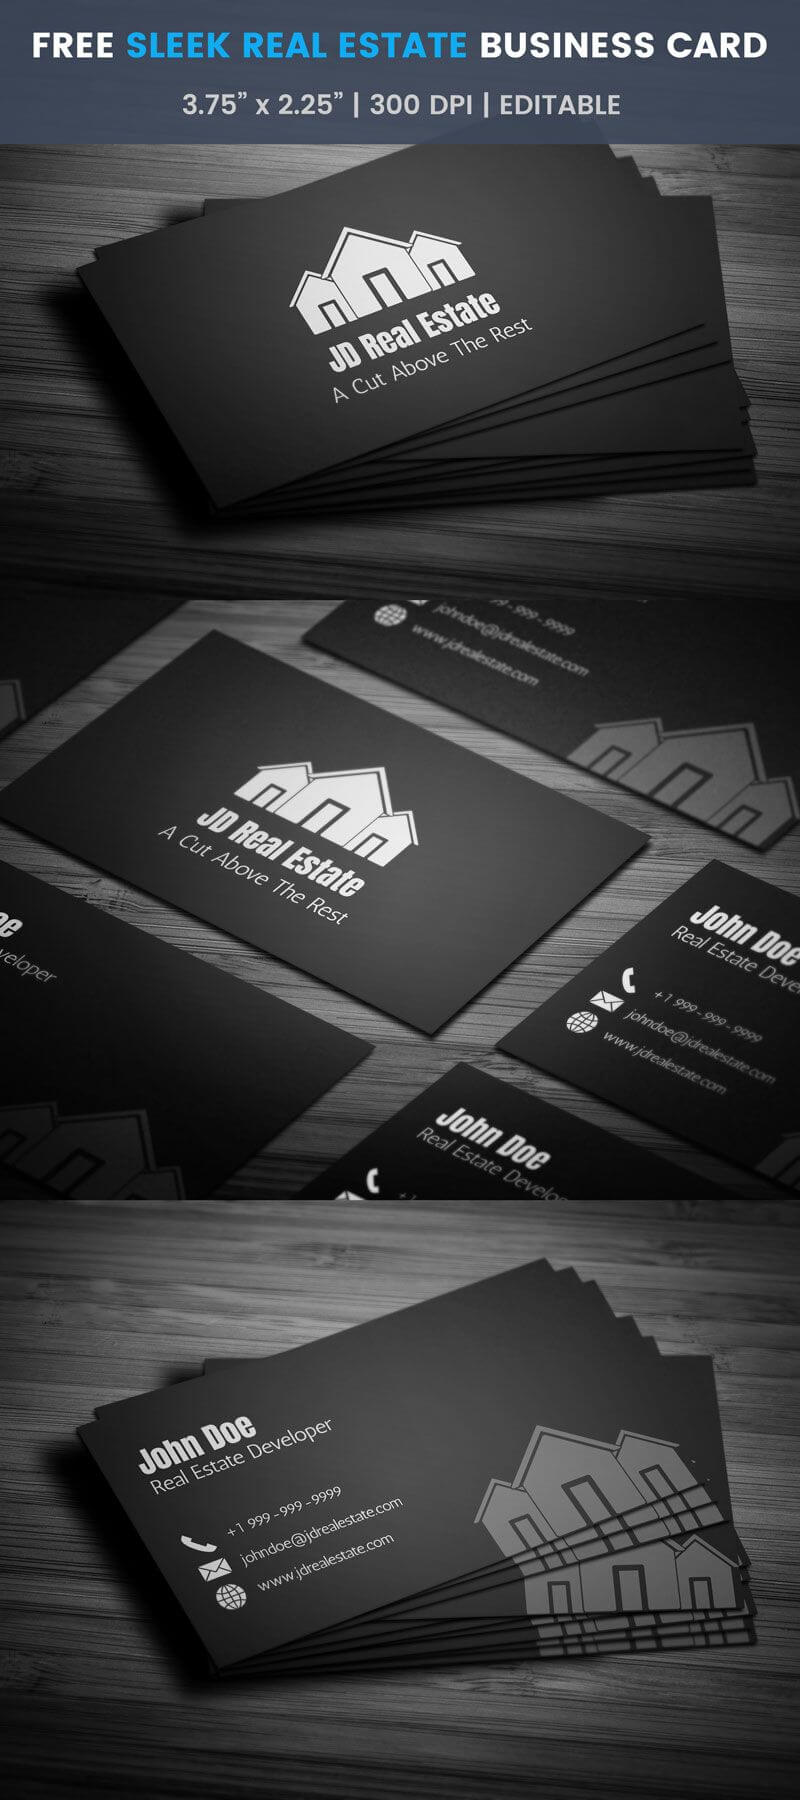 Sleek Real Estate Business Card – Full Preview | Free With Regard To Real Estate Business Cards Templates Free